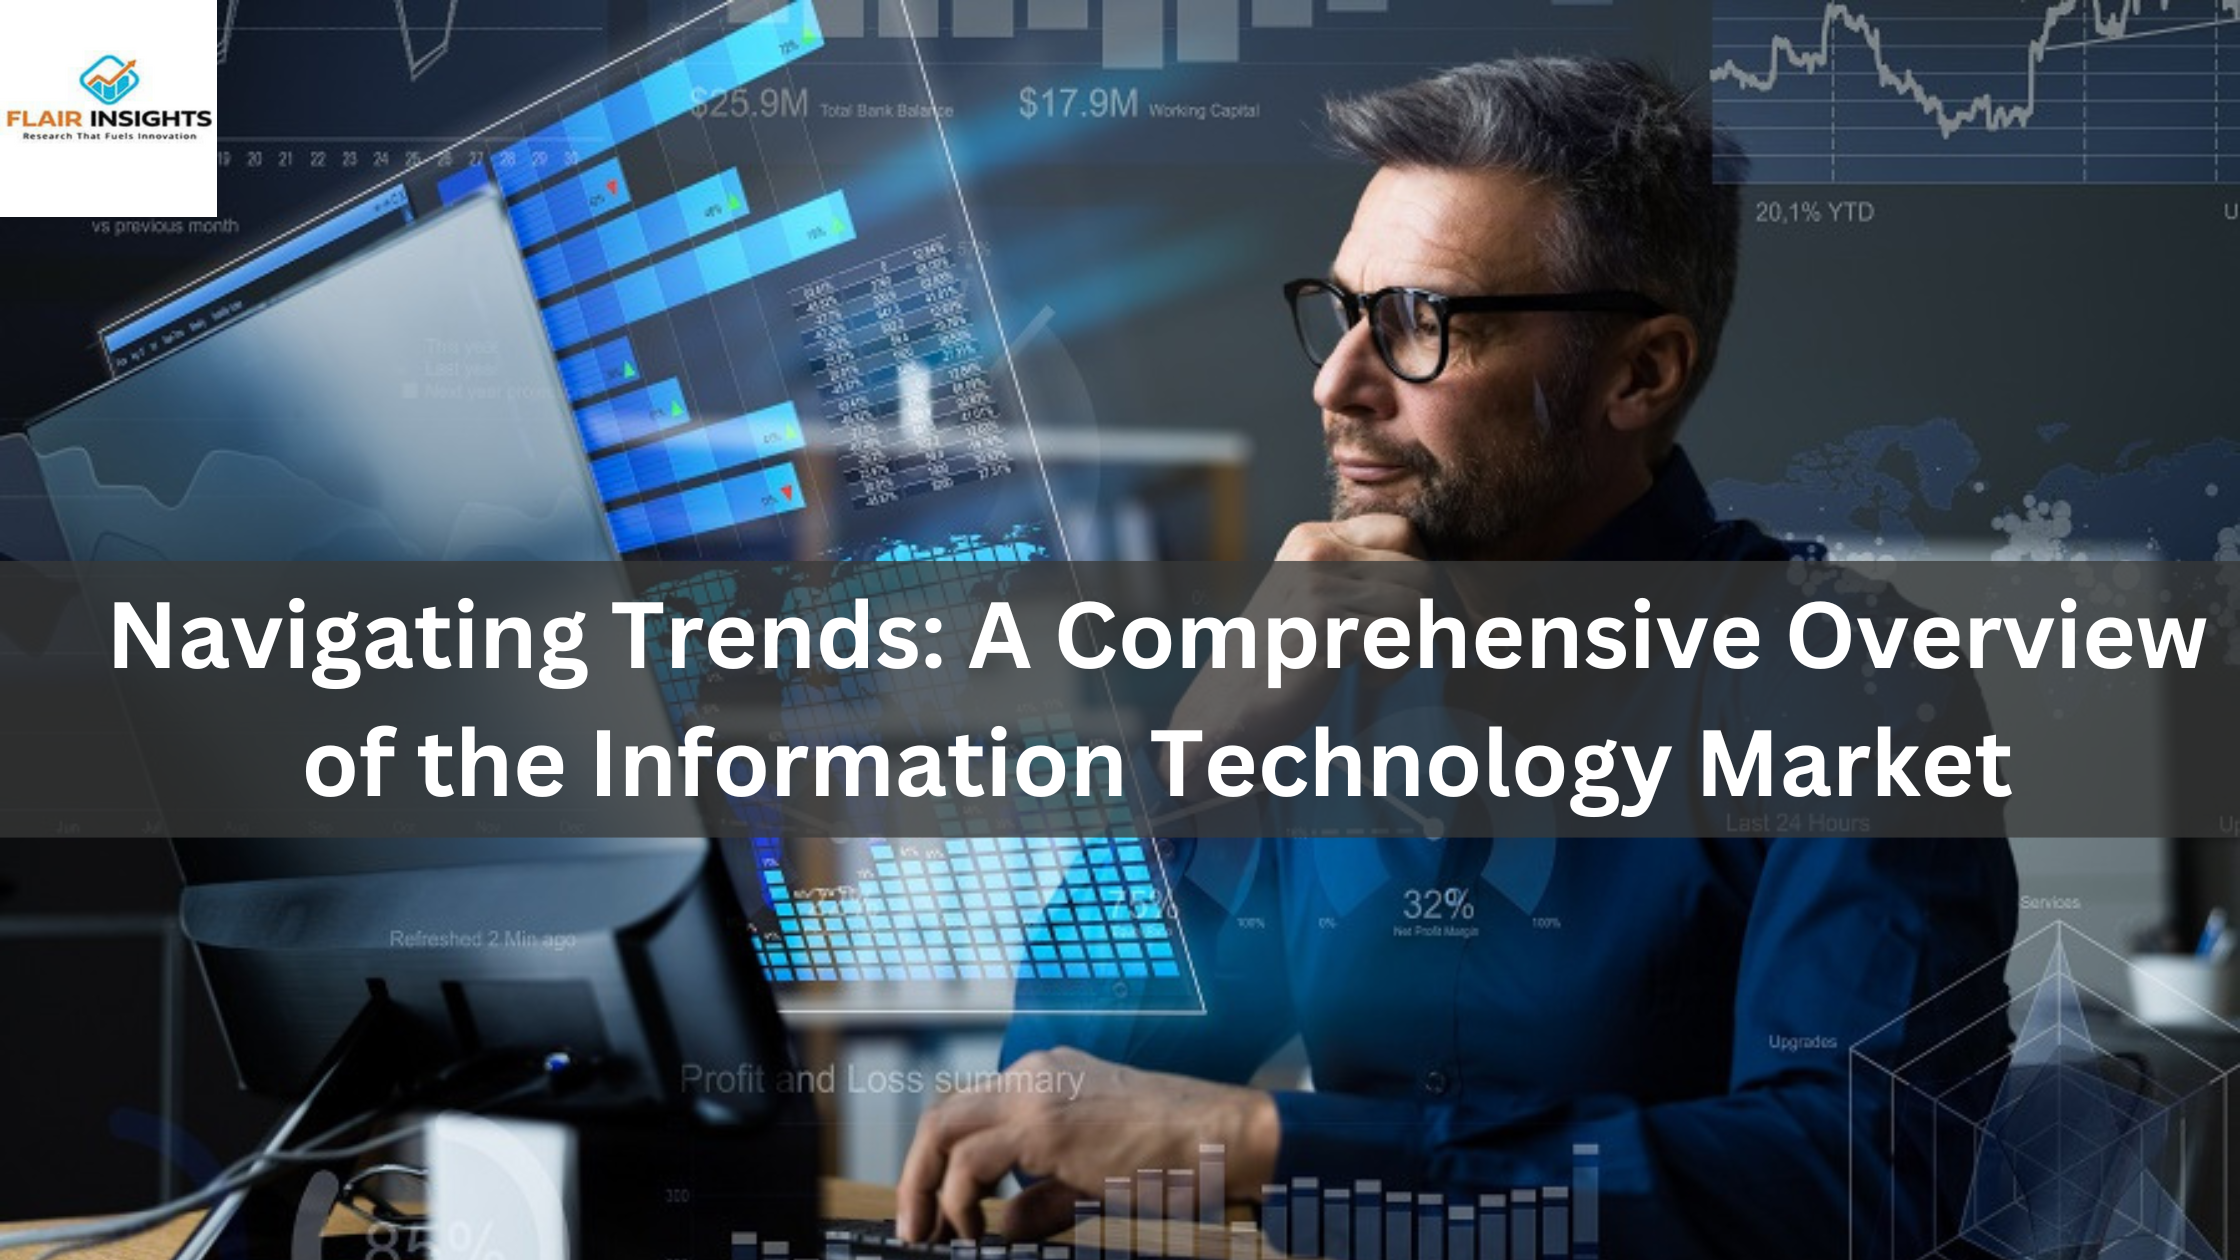 Navigating Trends: A Comprehensive Overview of the Information Technology Market